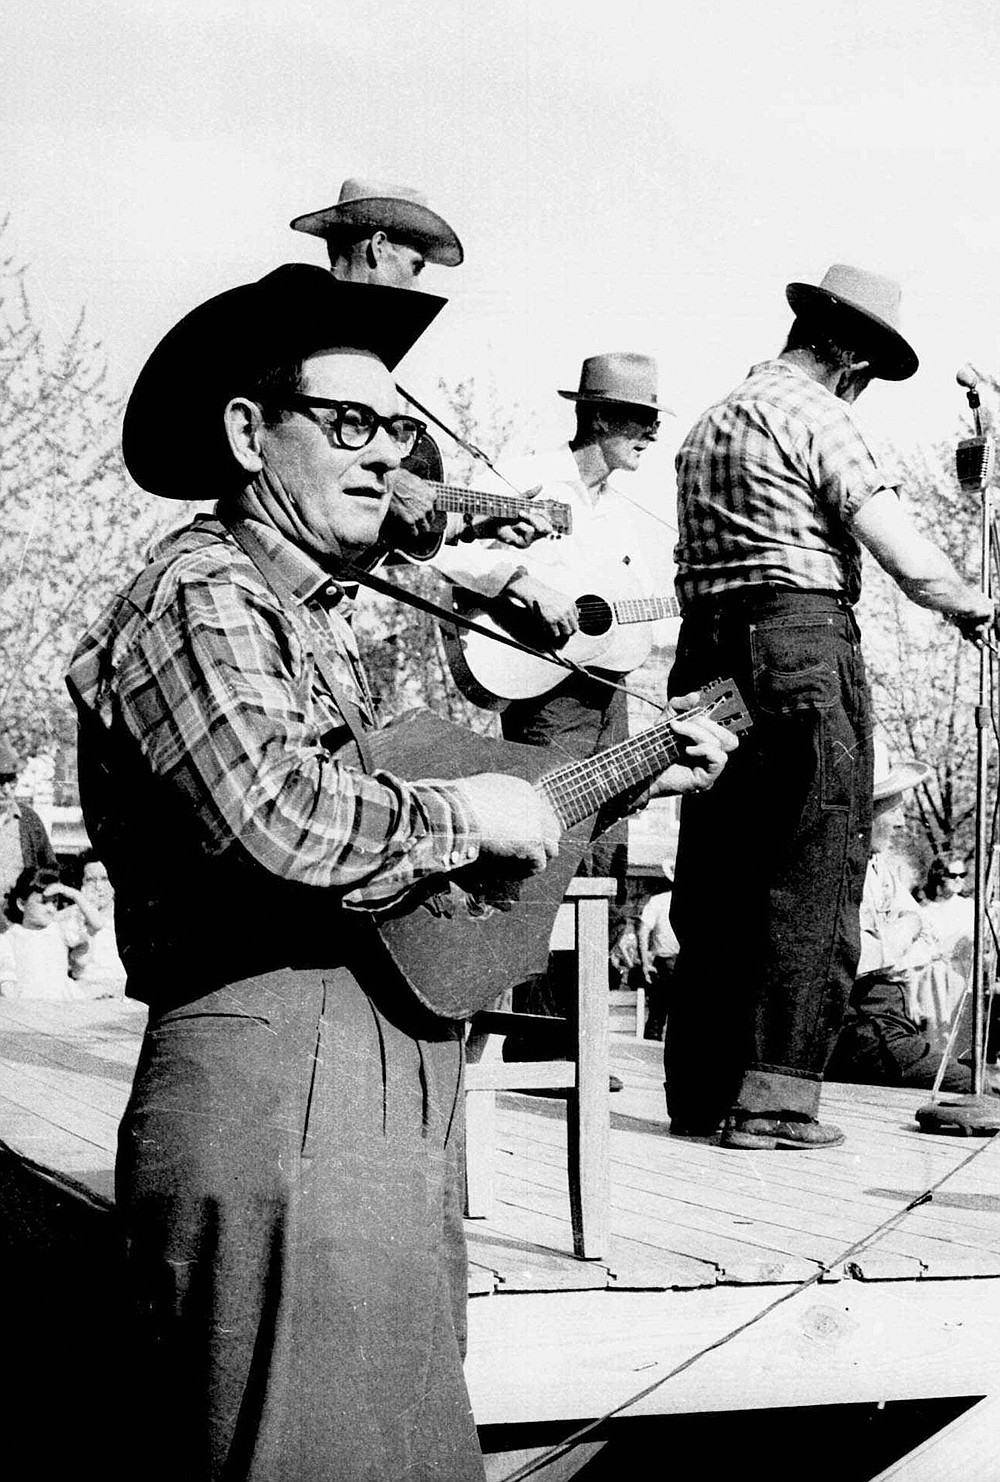 Folksinger-songwriter Jimmy Driftwood keeps watch over the Arkansas Folk Festiveal in Mountain View in this July 26, 1964 file photo.
(AP)